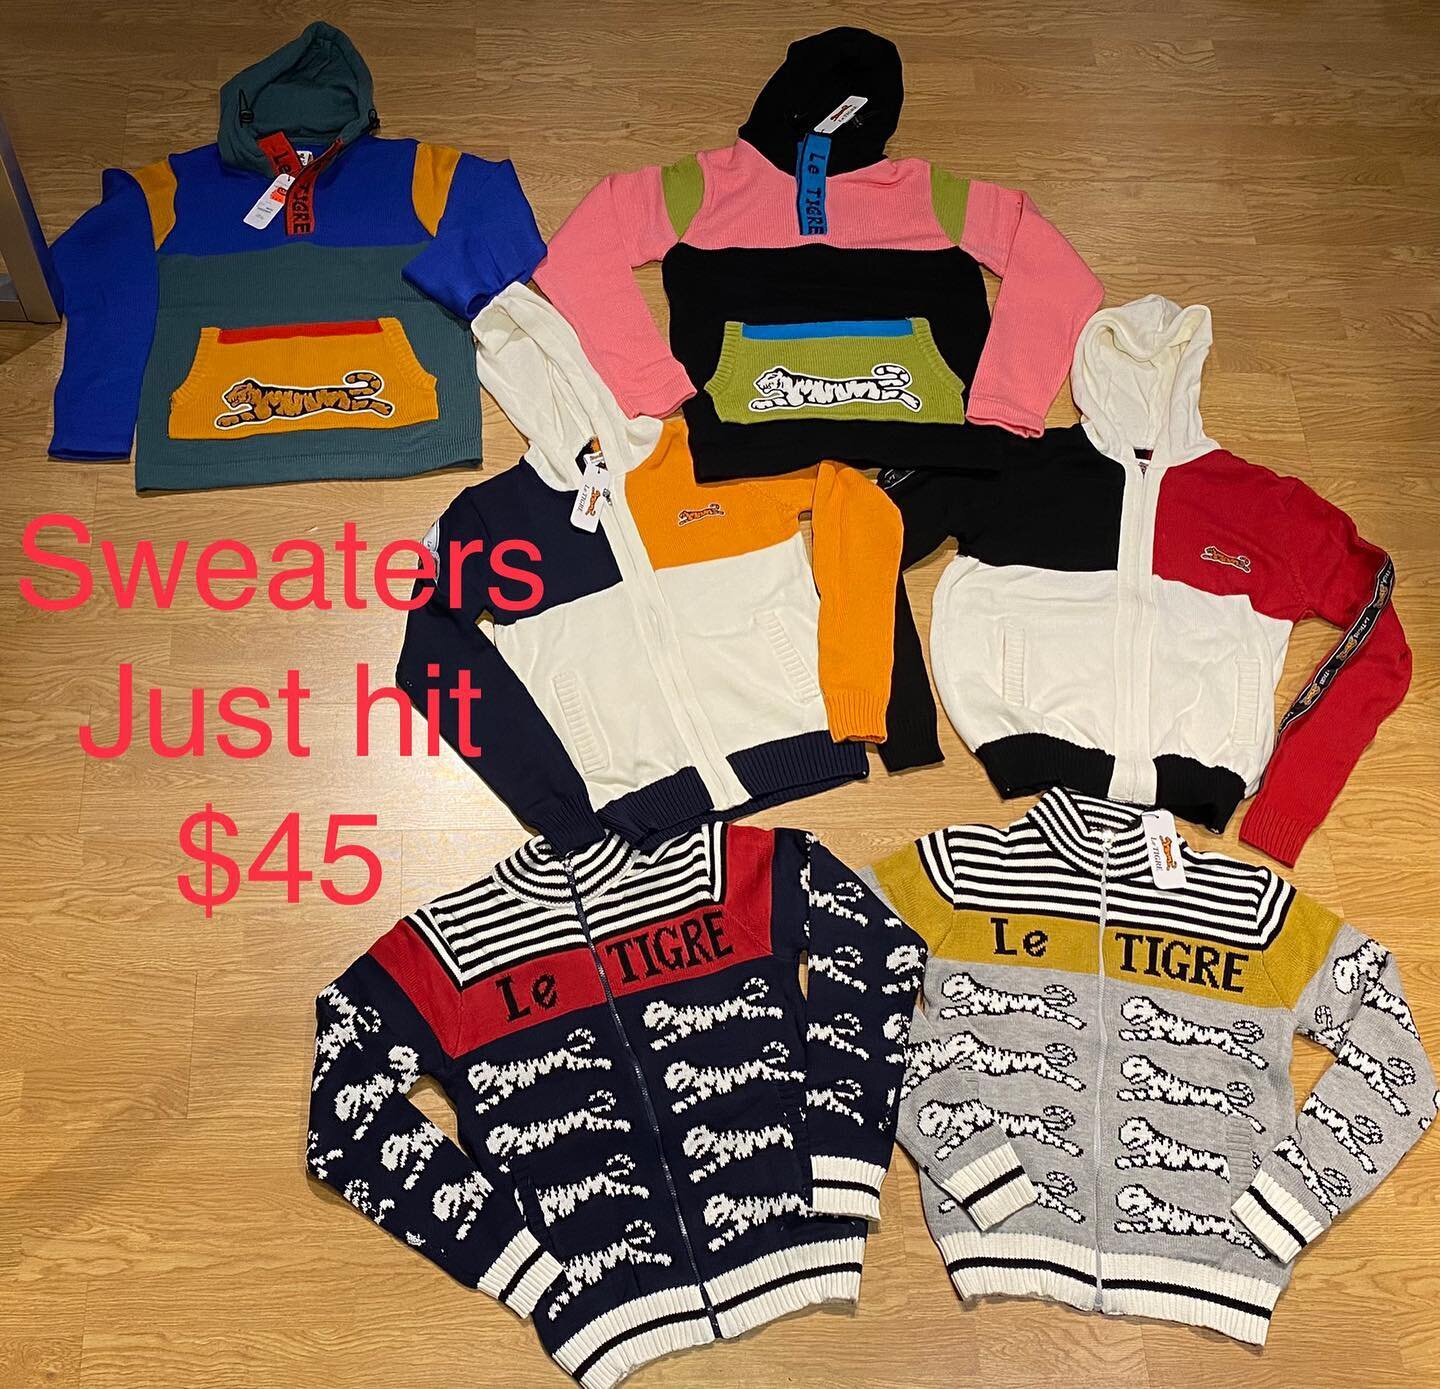 Le Tigre Sweaters are back in! 18 new styles! All sizes! #203 #streetwear #sweaters #90s #80s  #bpt